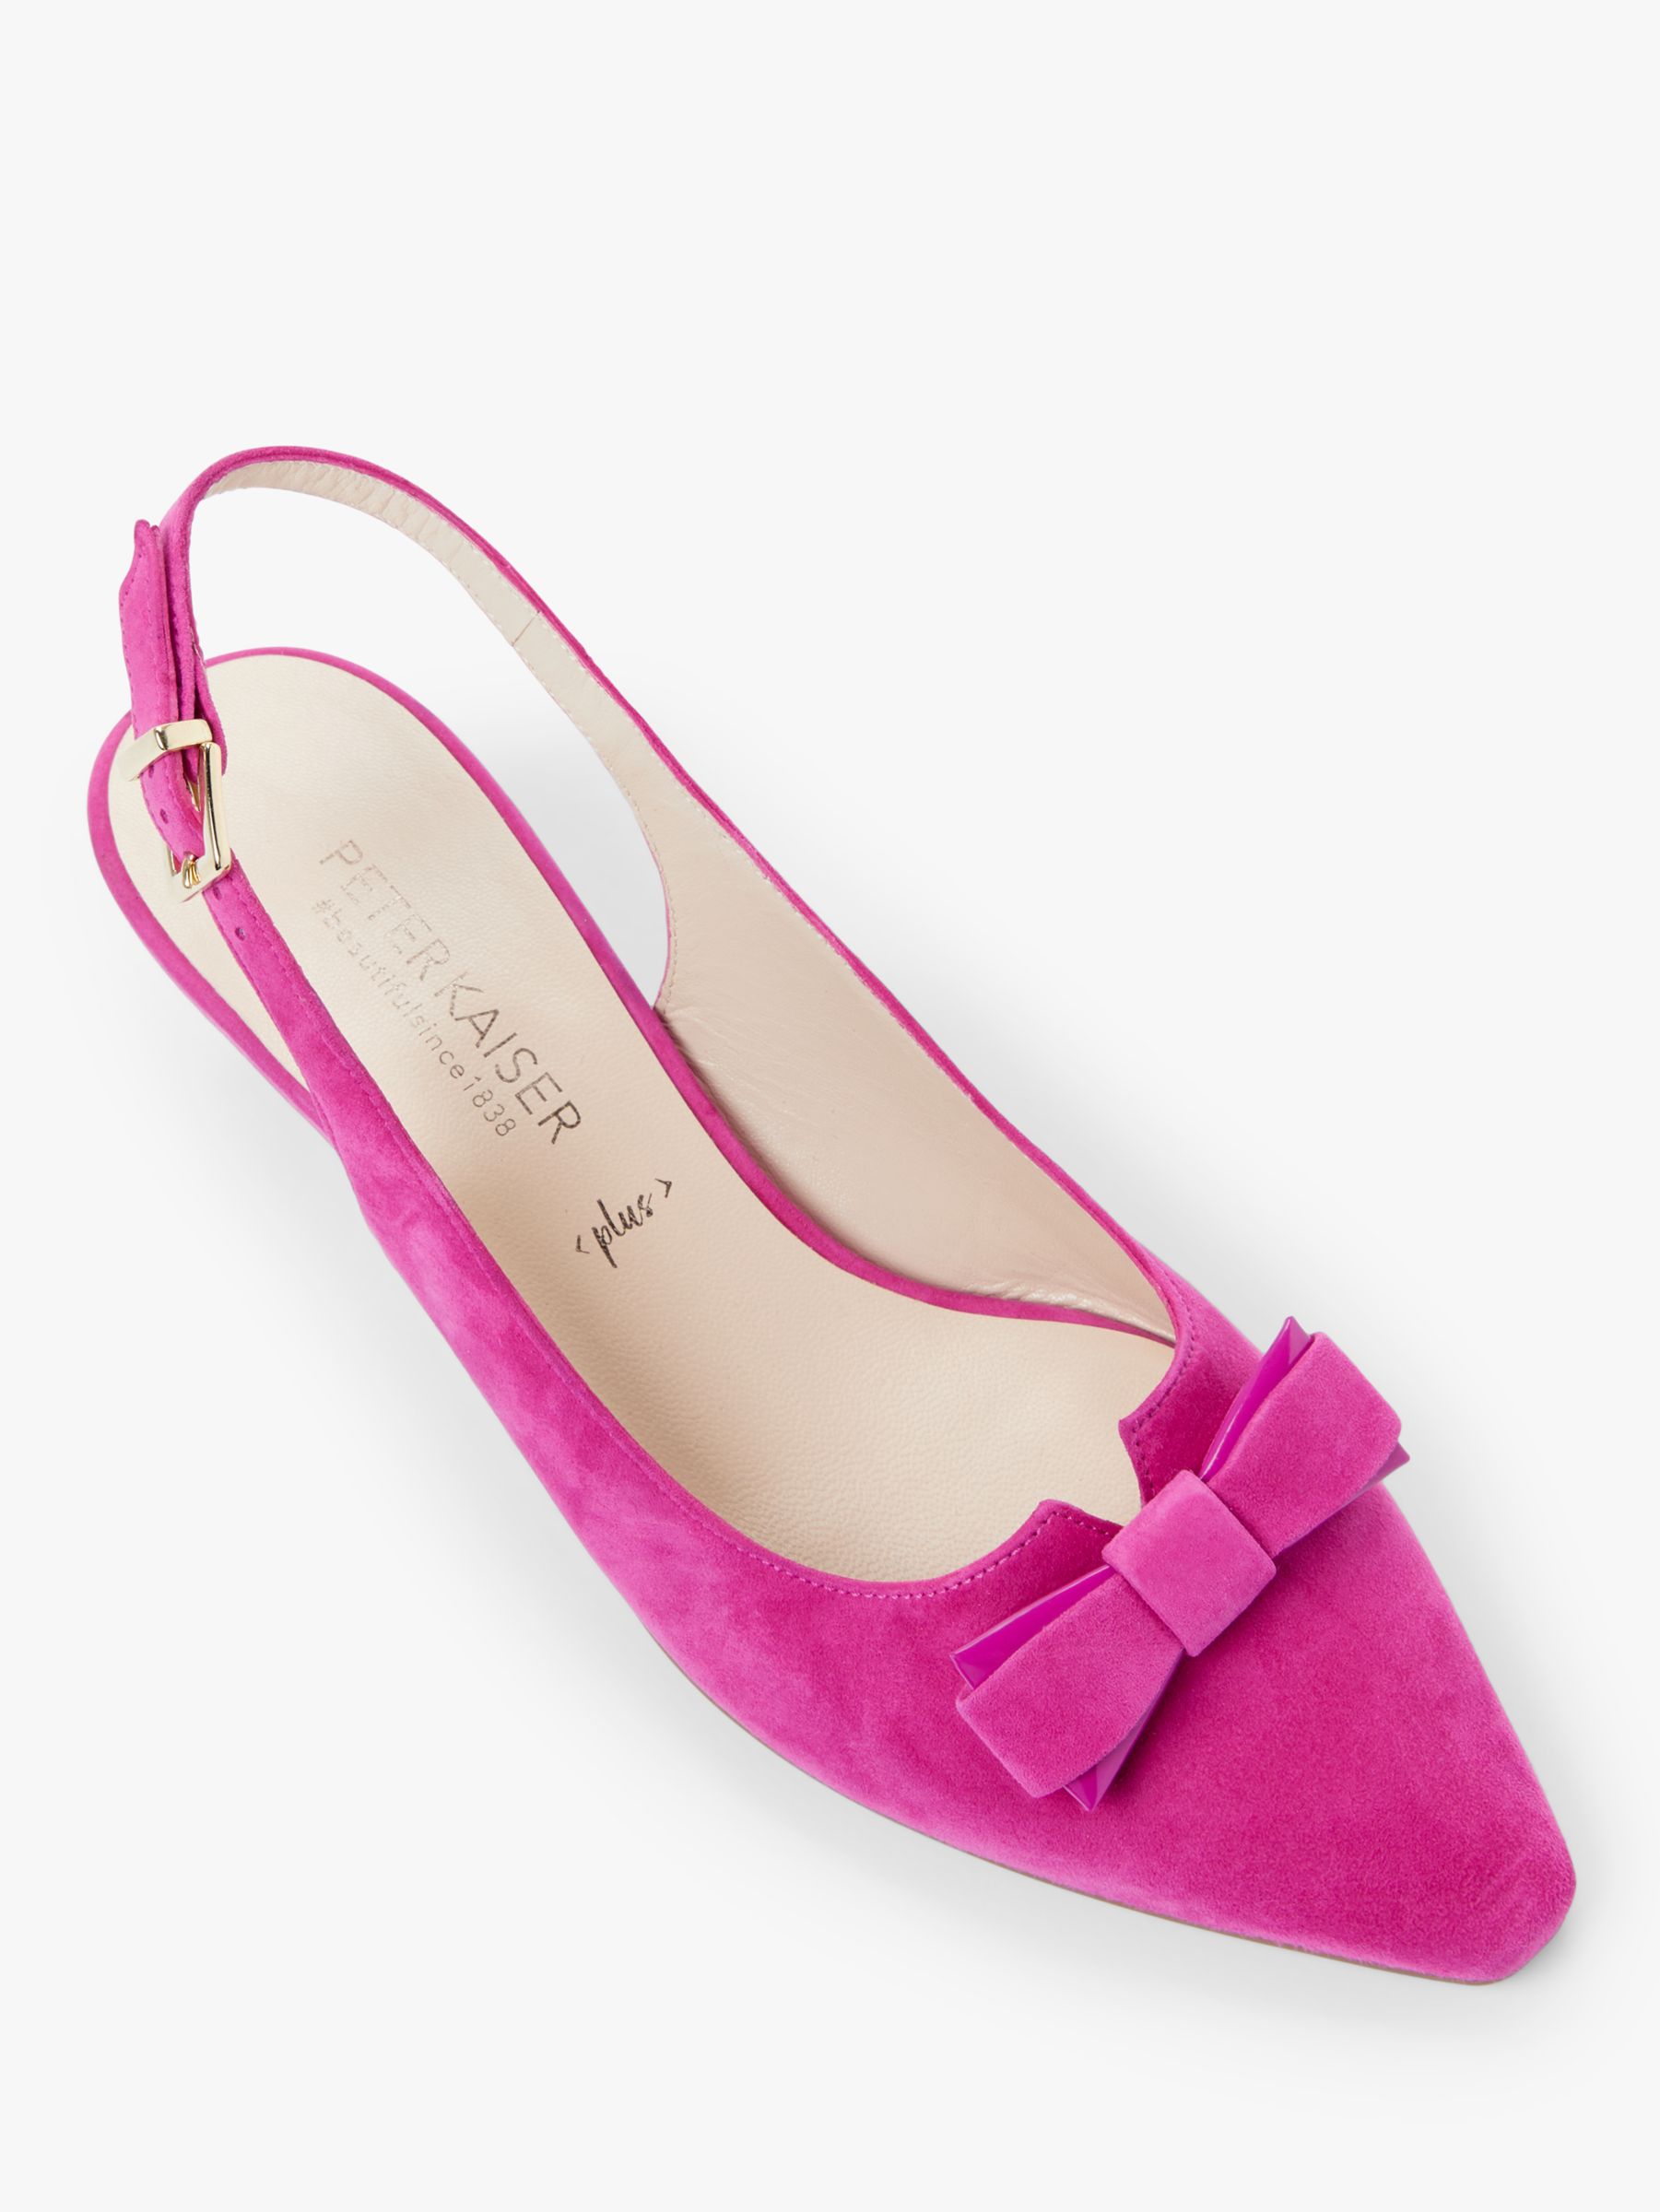 Peter Kaiser Sona Bow Slingback Court Shoes, Berry Suede